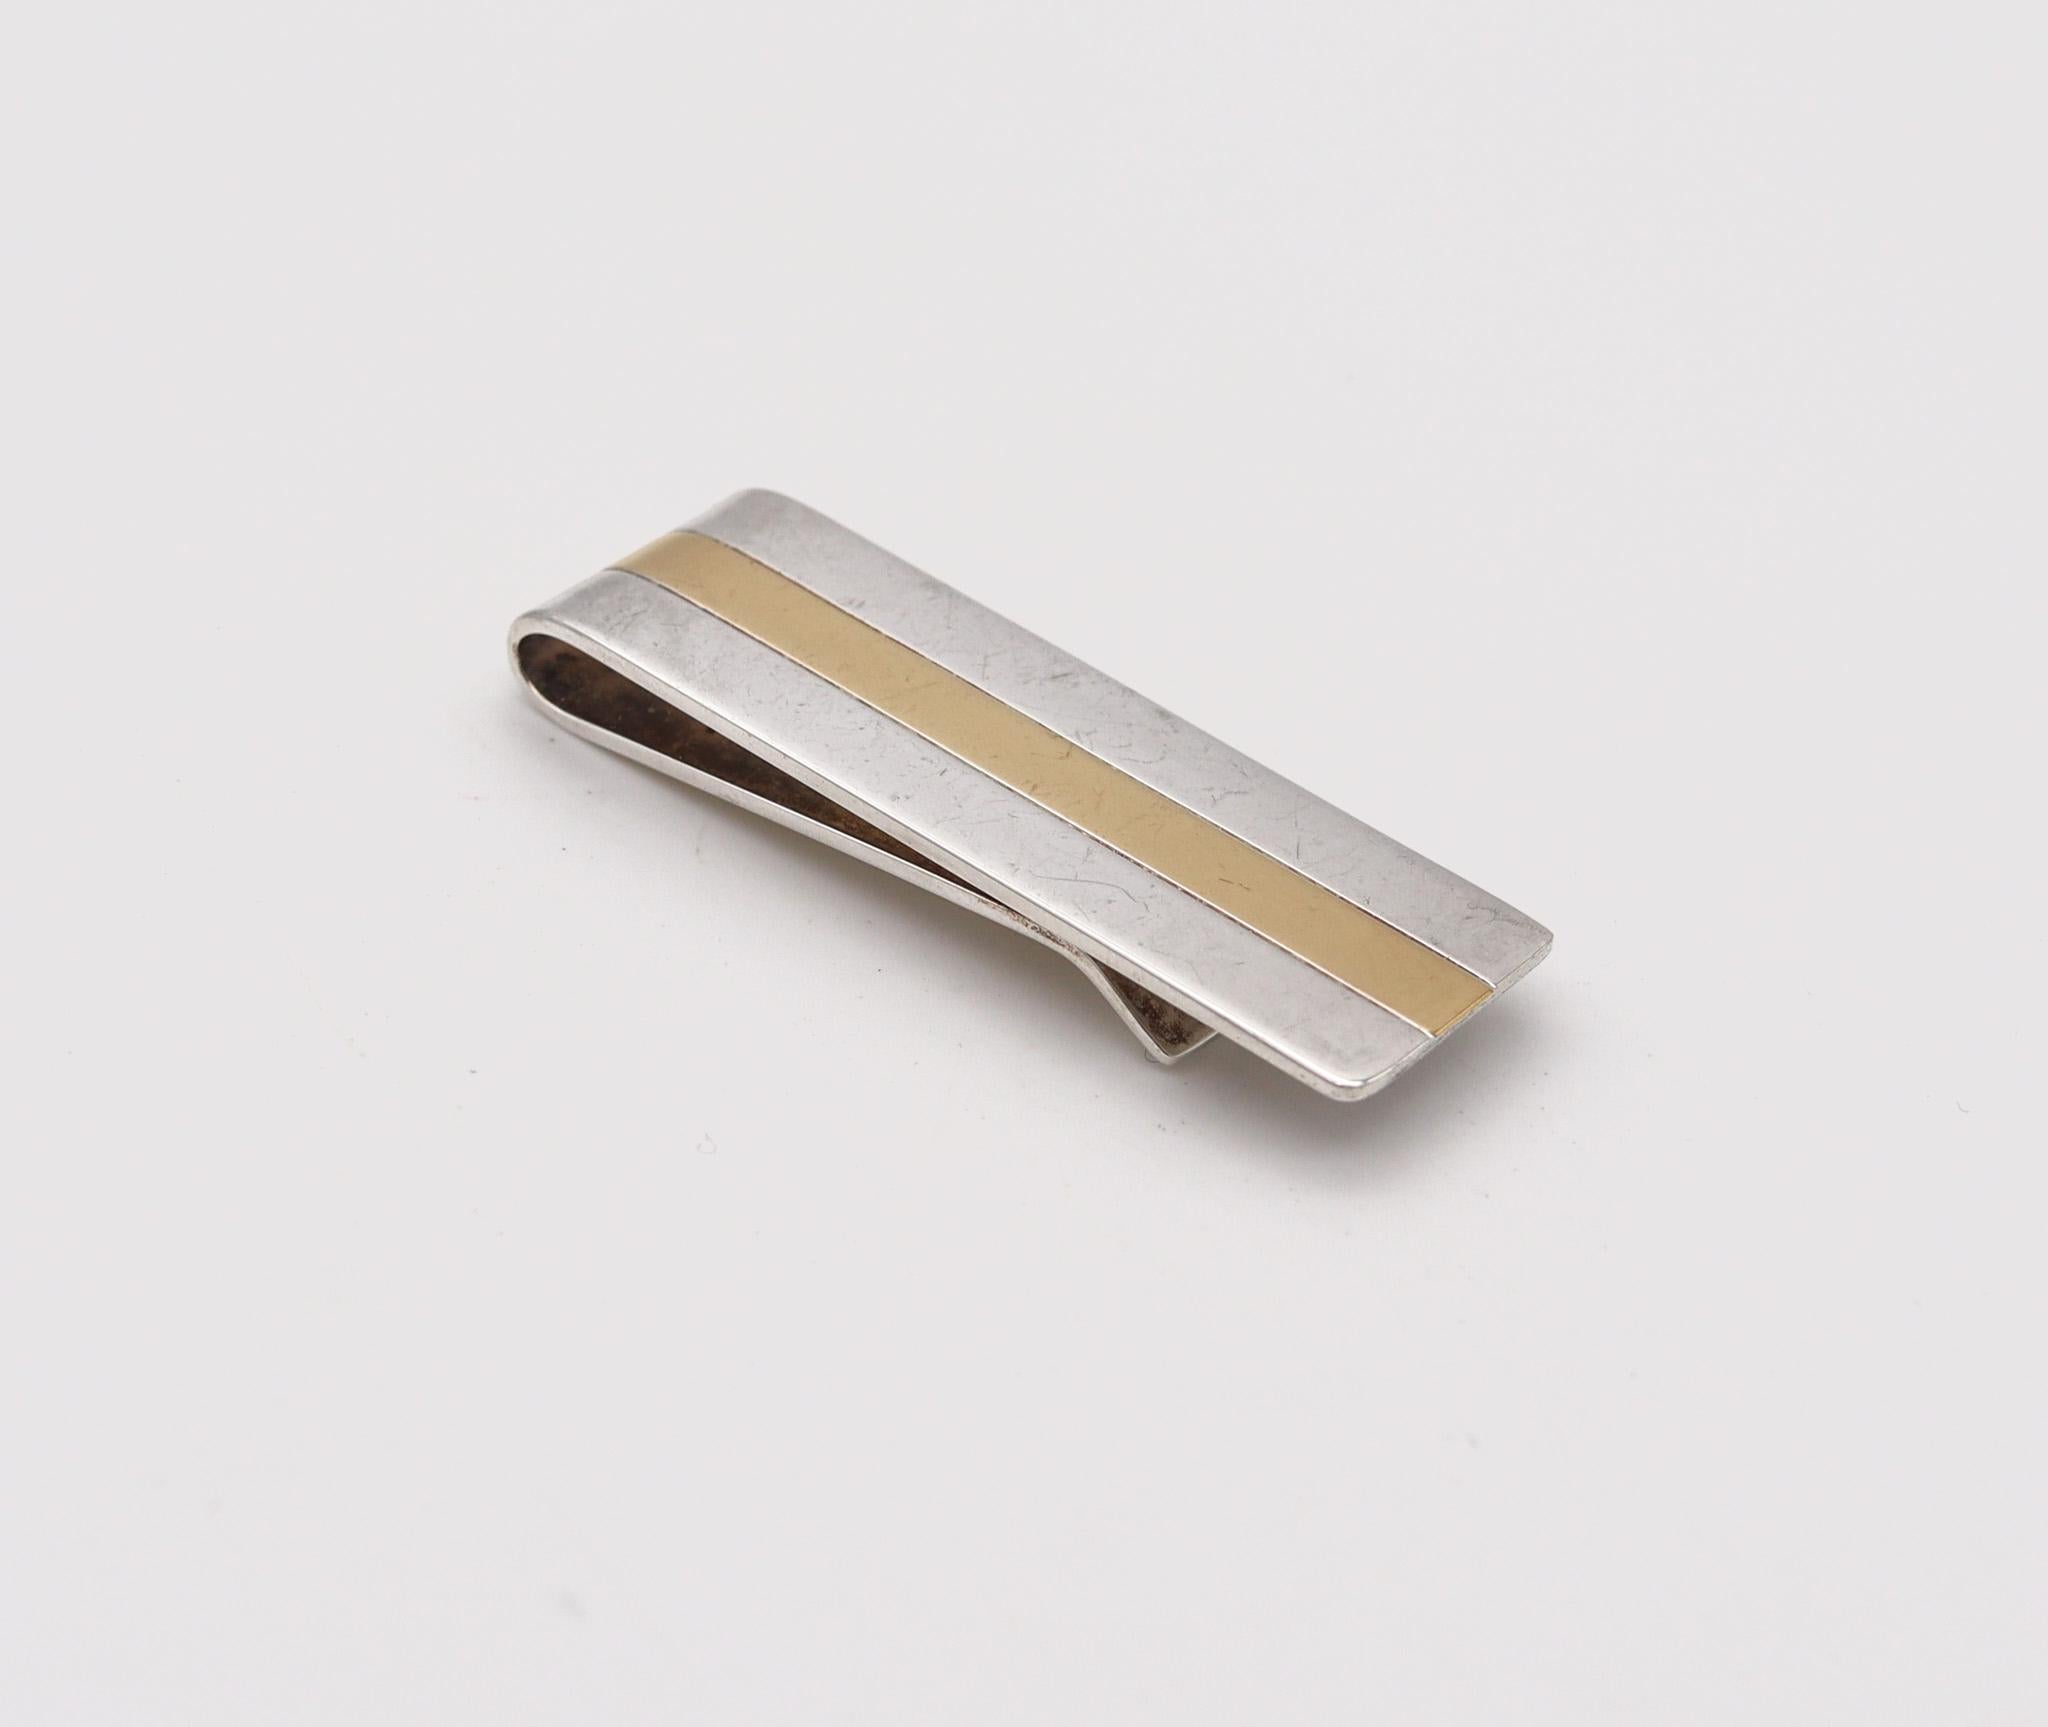 Money clip designed by Tiffany & Co.

Beautiful geometric money clip, created in New York by the jewelry house of Tiffany & Co. The money clip is crafted in solid .925/.999 sterling silver and yellow gold of 18 karats with all parts in high polished